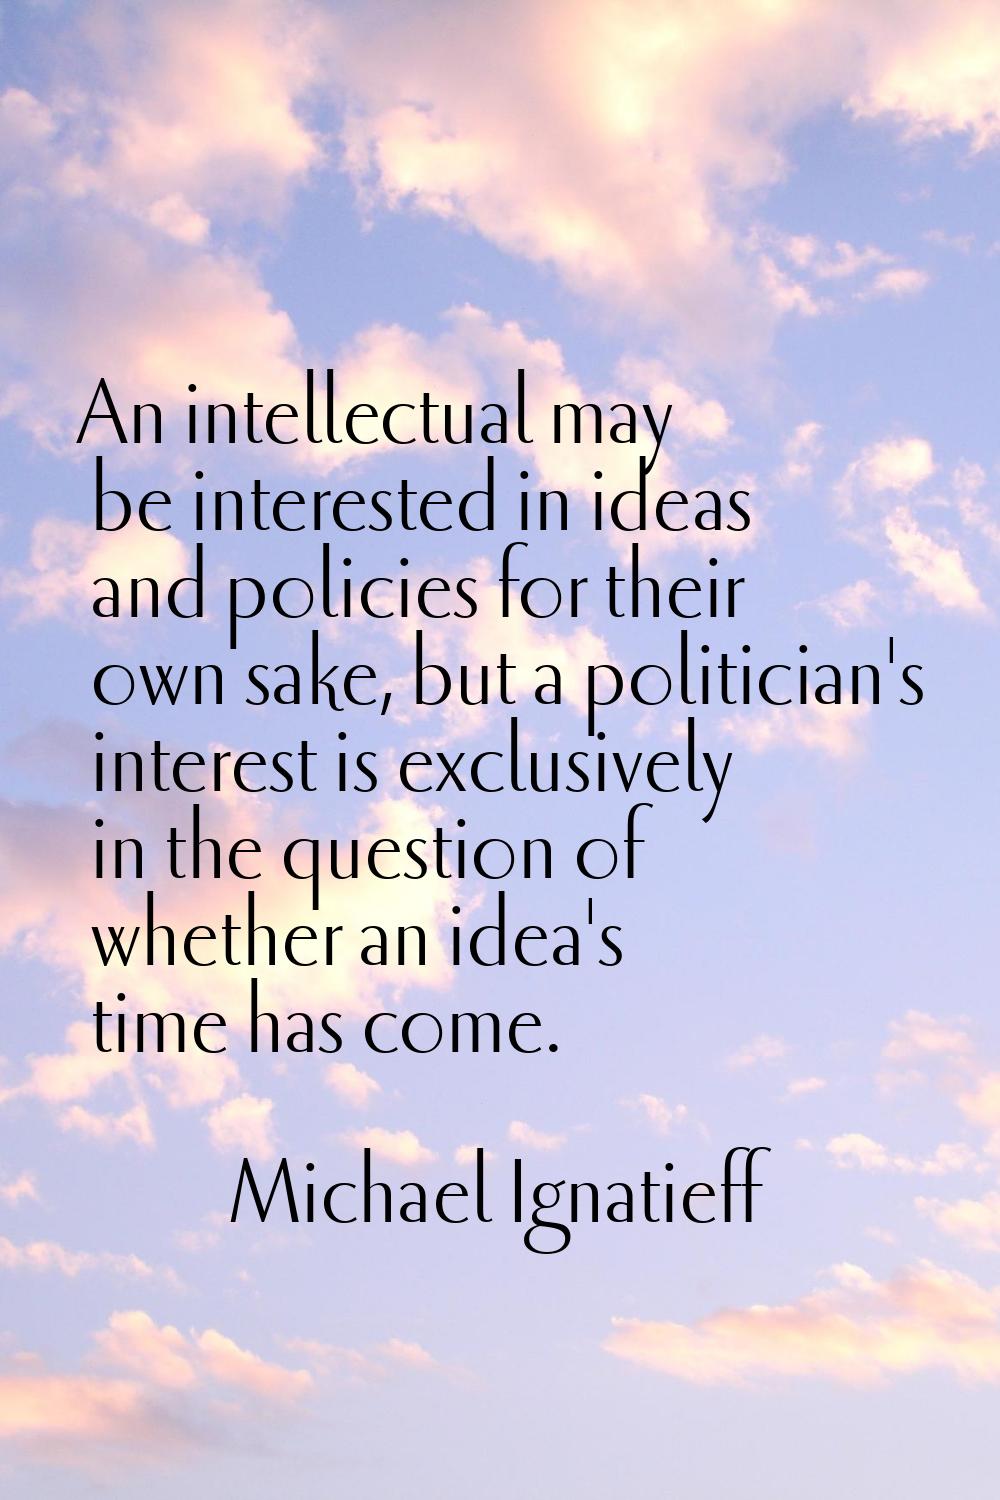 An intellectual may be interested in ideas and policies for their own sake, but a politician's inte